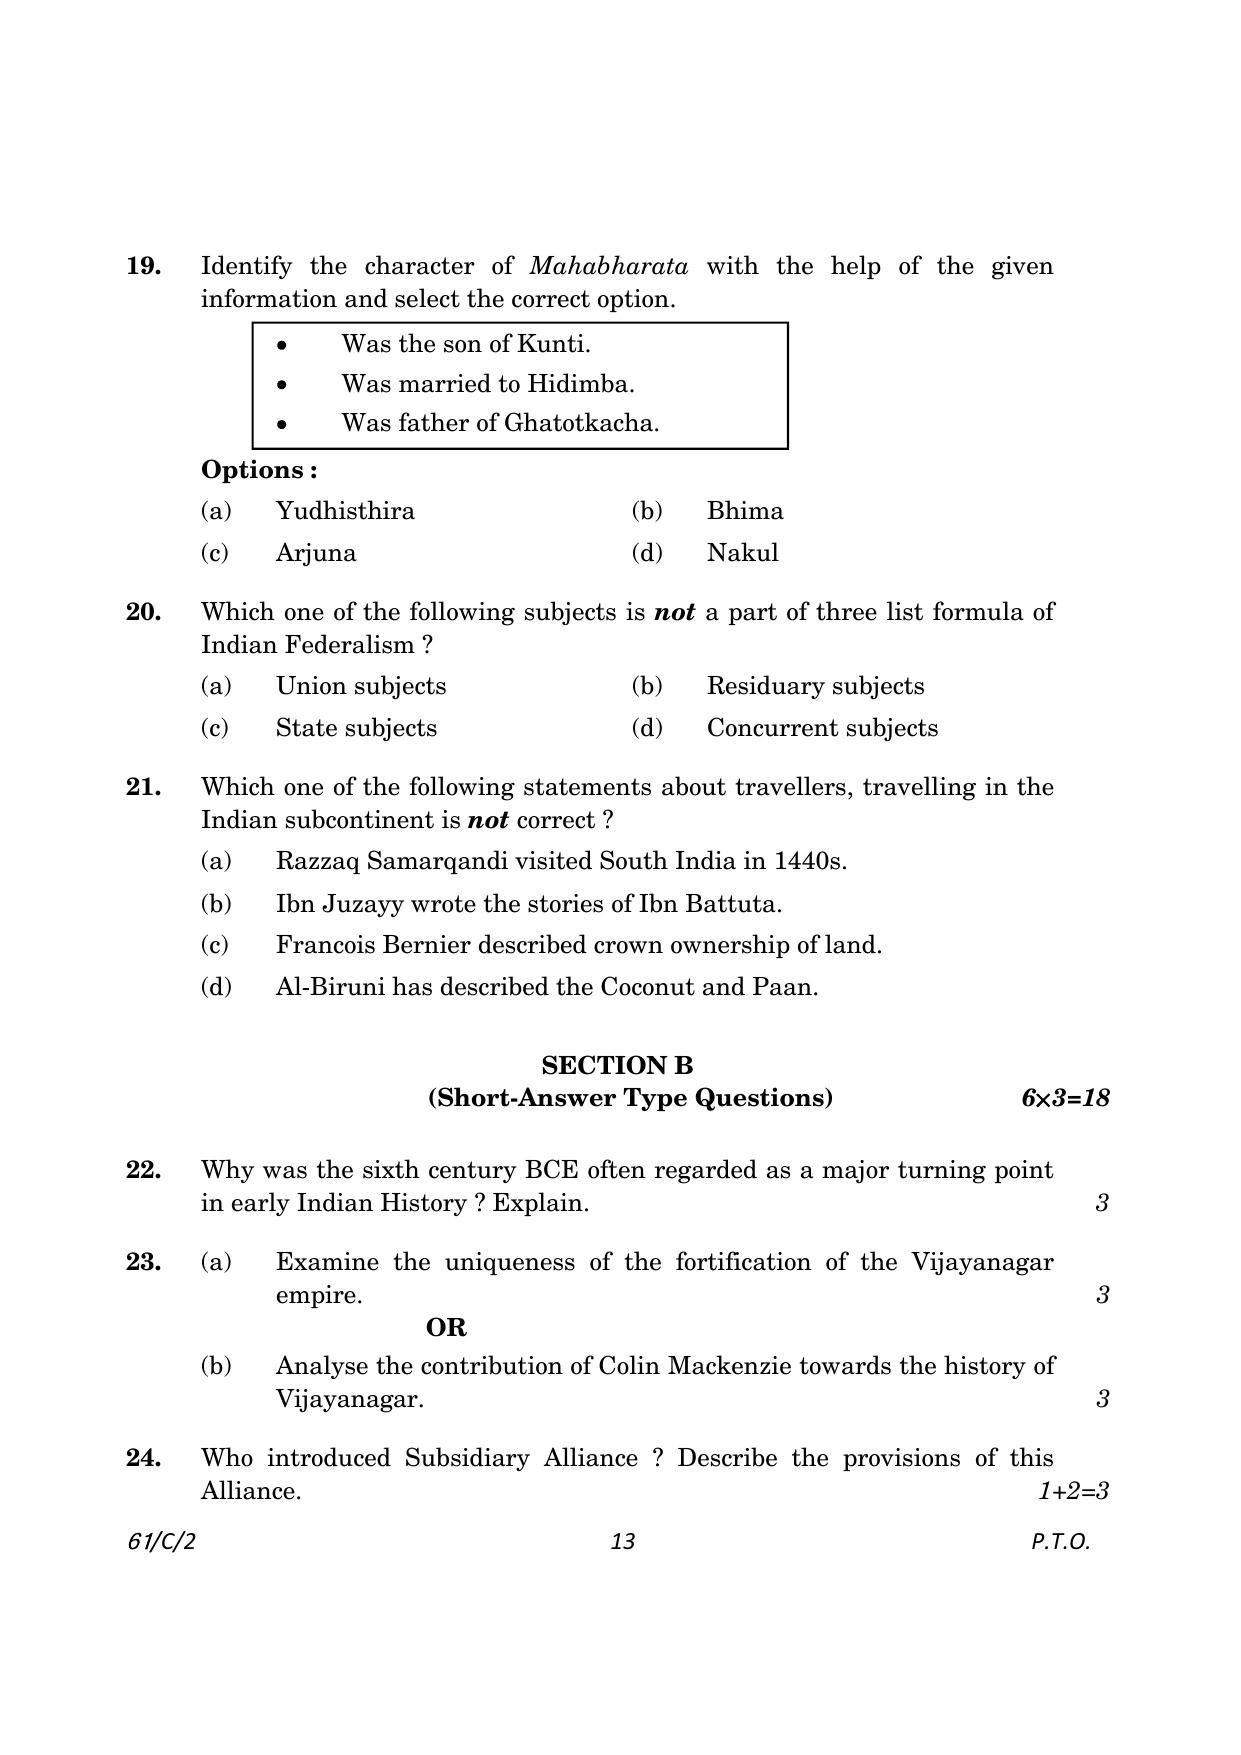 CBSE Class 12 61-2 History 2023 (Compartment) Question Paper - Page 13